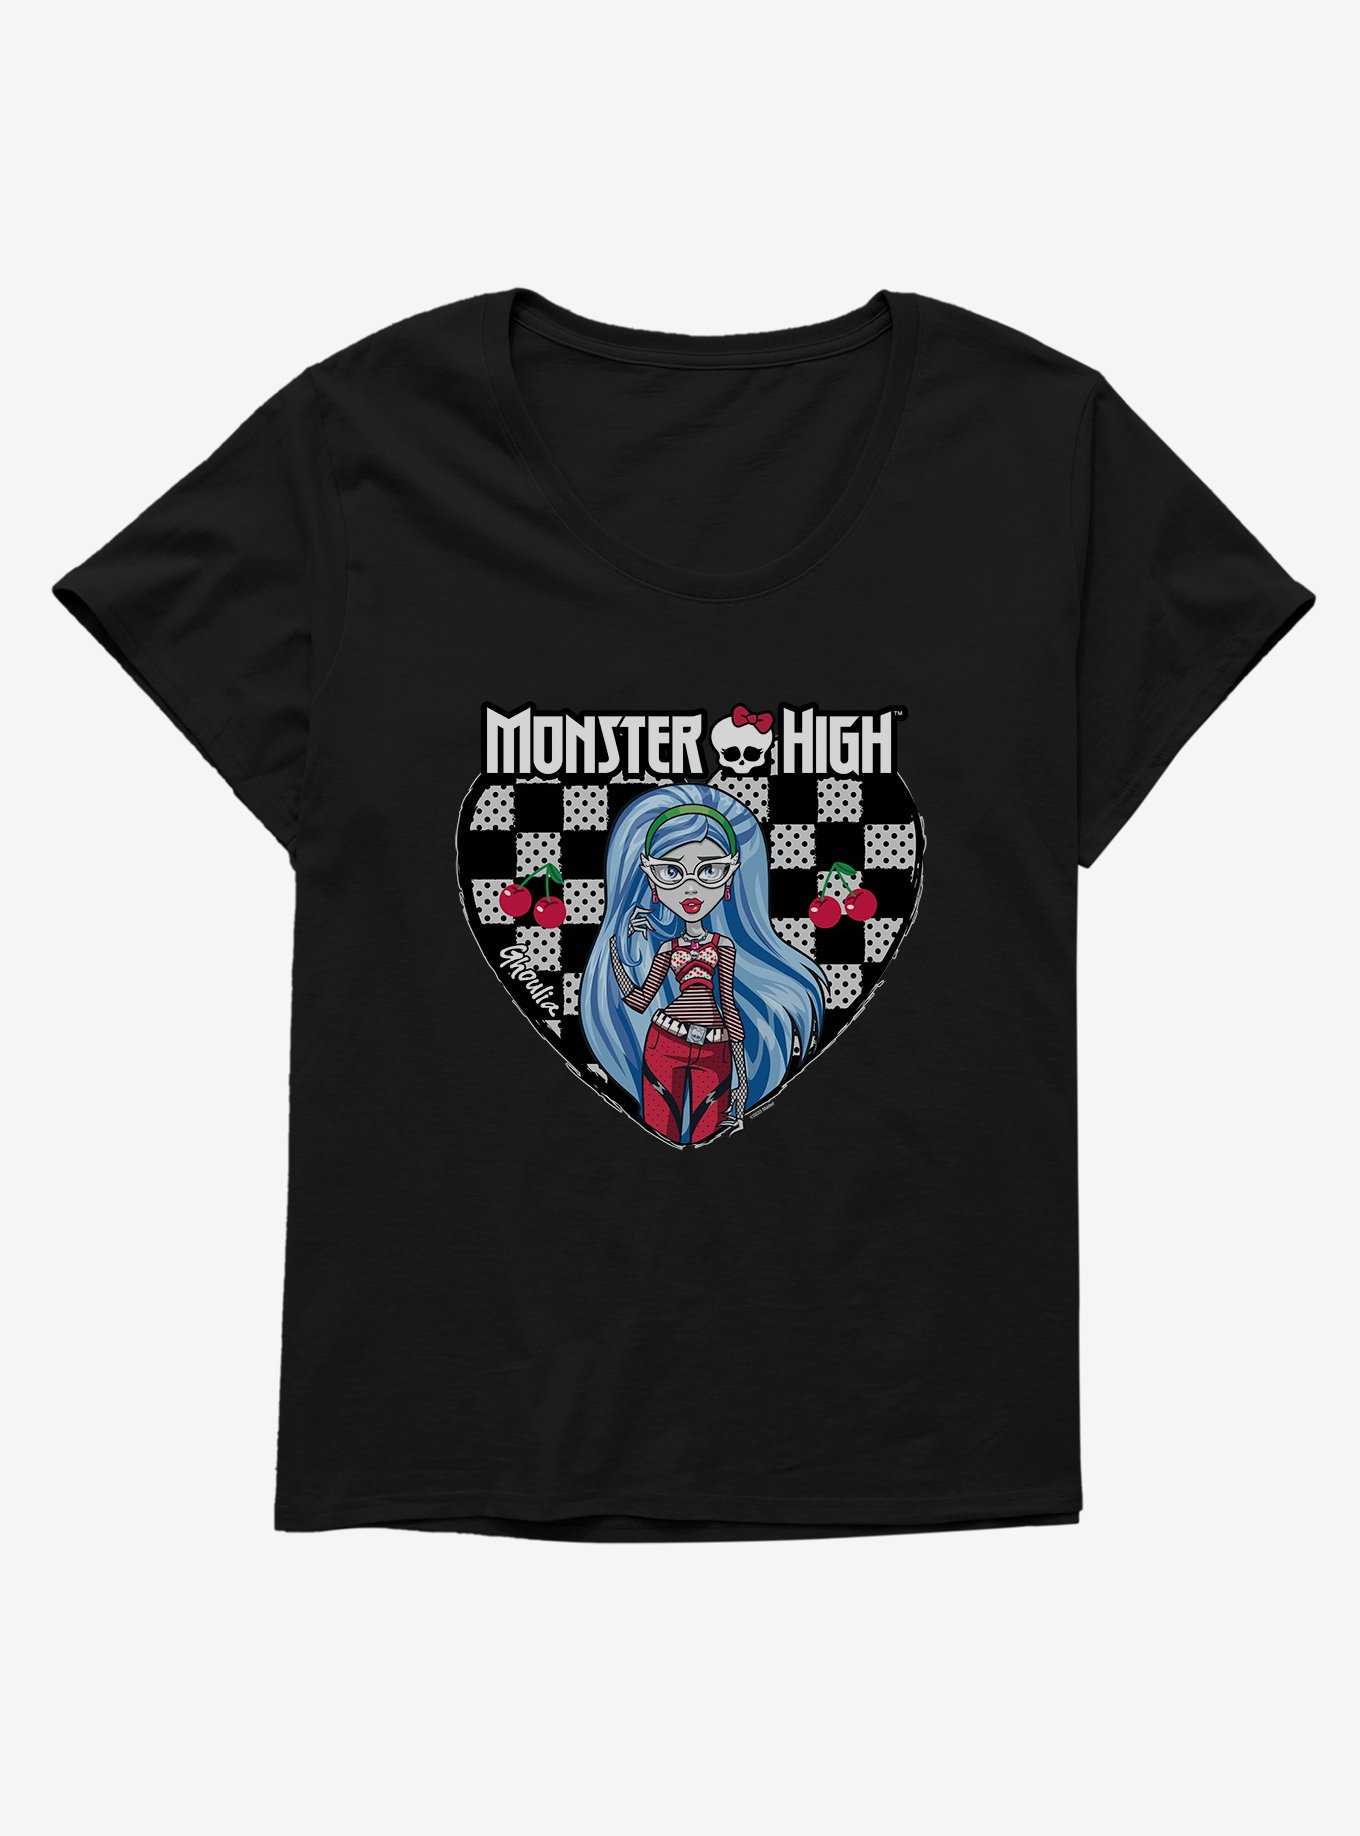 Monster High Ghoulia Yelps Checkerboard Heart Girls T-Shirt Plus Size, , hi-res